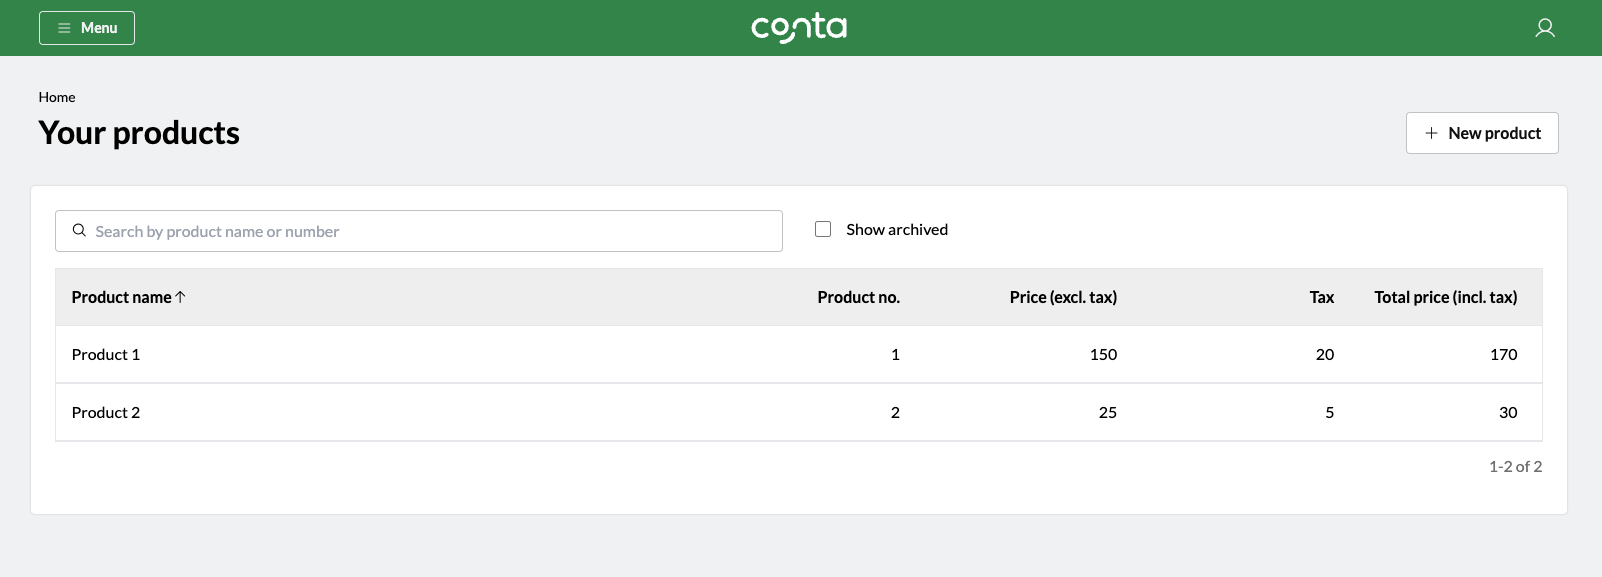 The product catalog in Conta, showing all your products and their details